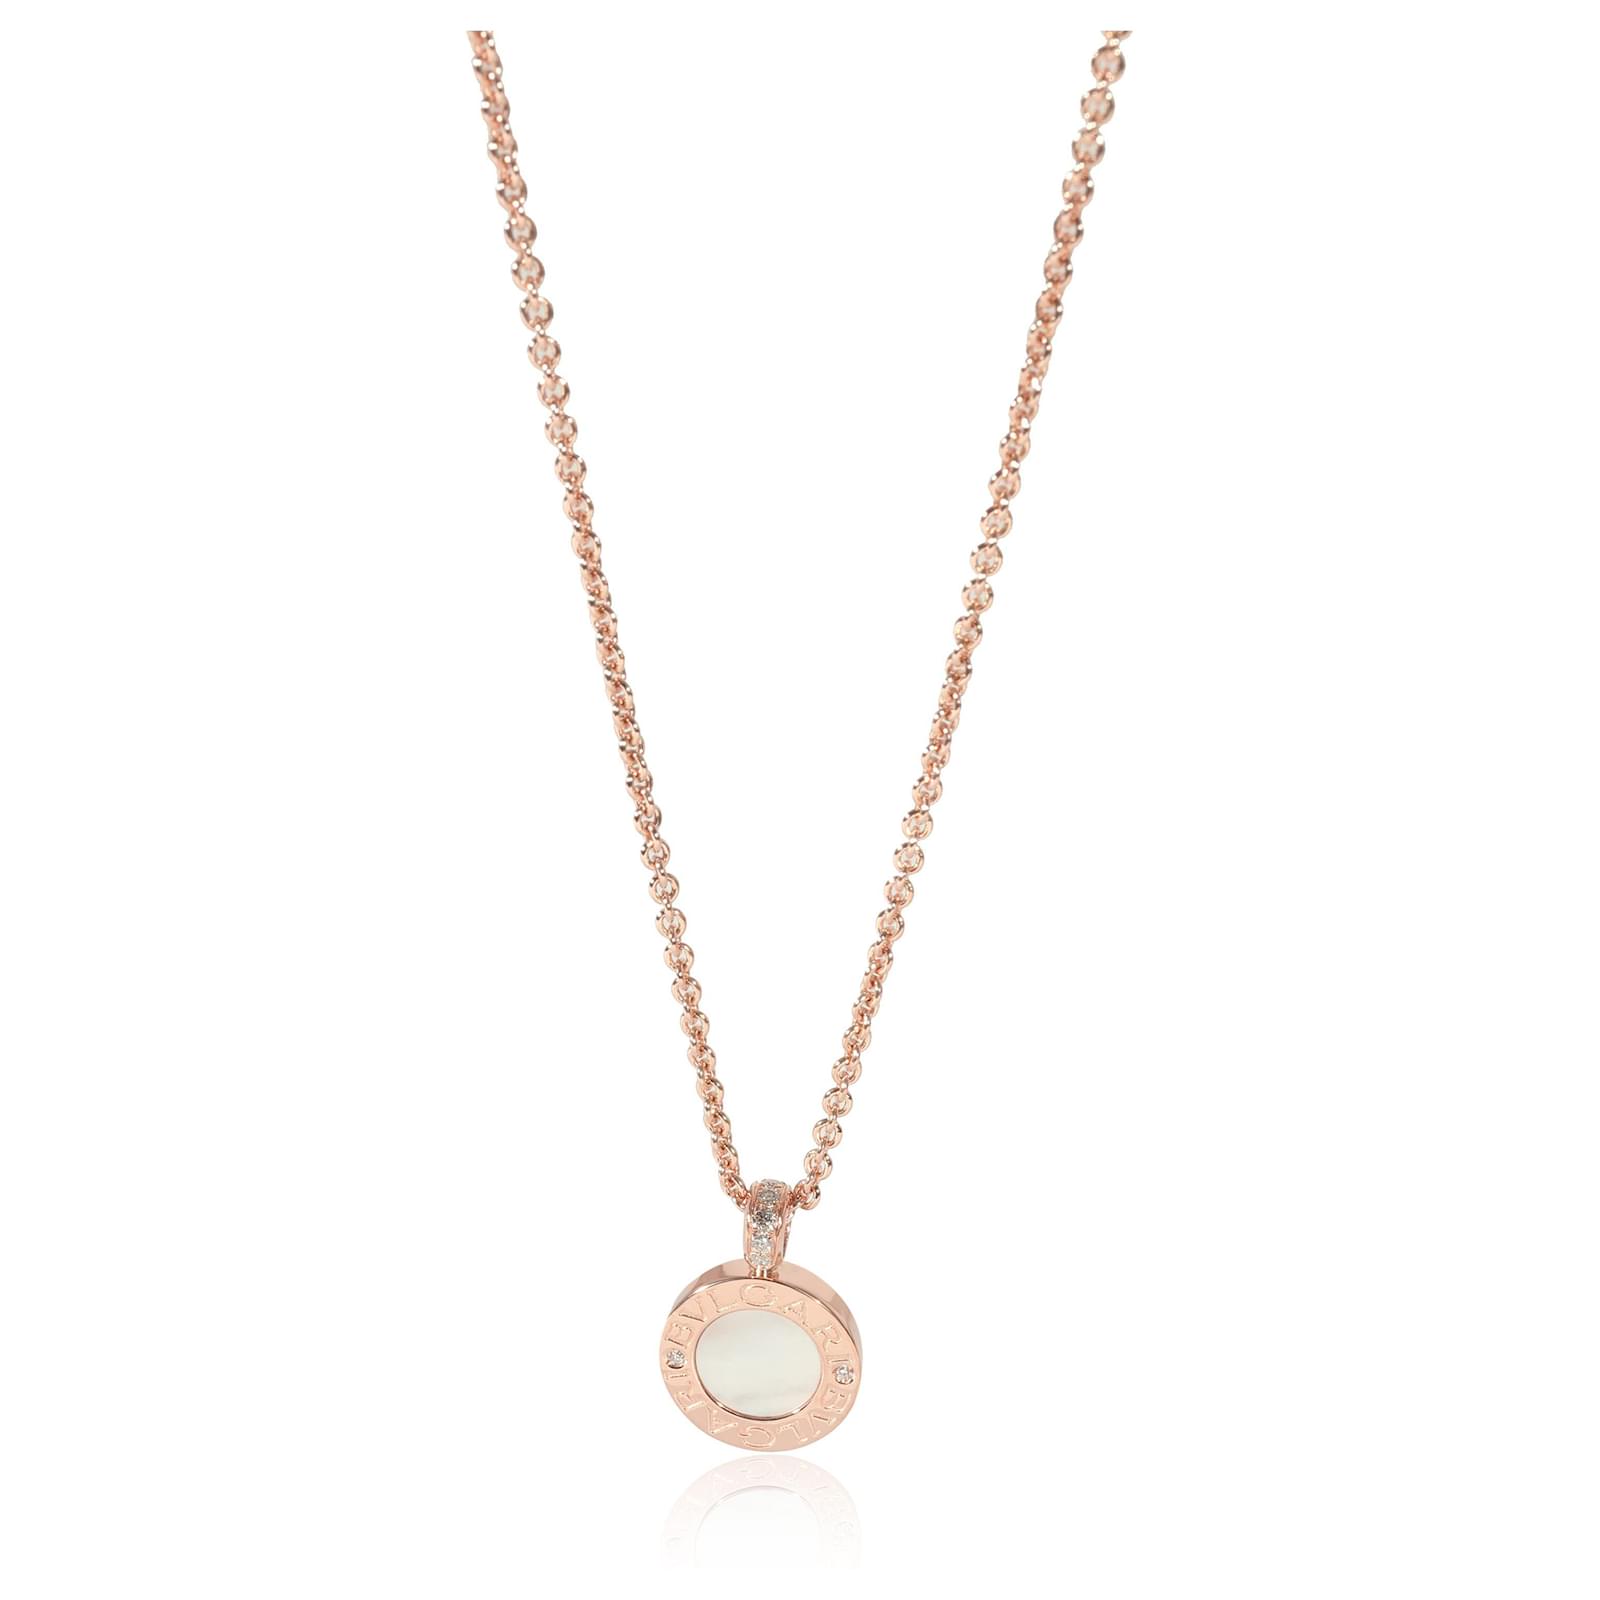 Rose gold BVLGARI BVLGARI Necklace Black,White with 0.11 ct Diamonds,Mother  of Pearl,Onyx | Bulgari Official Store